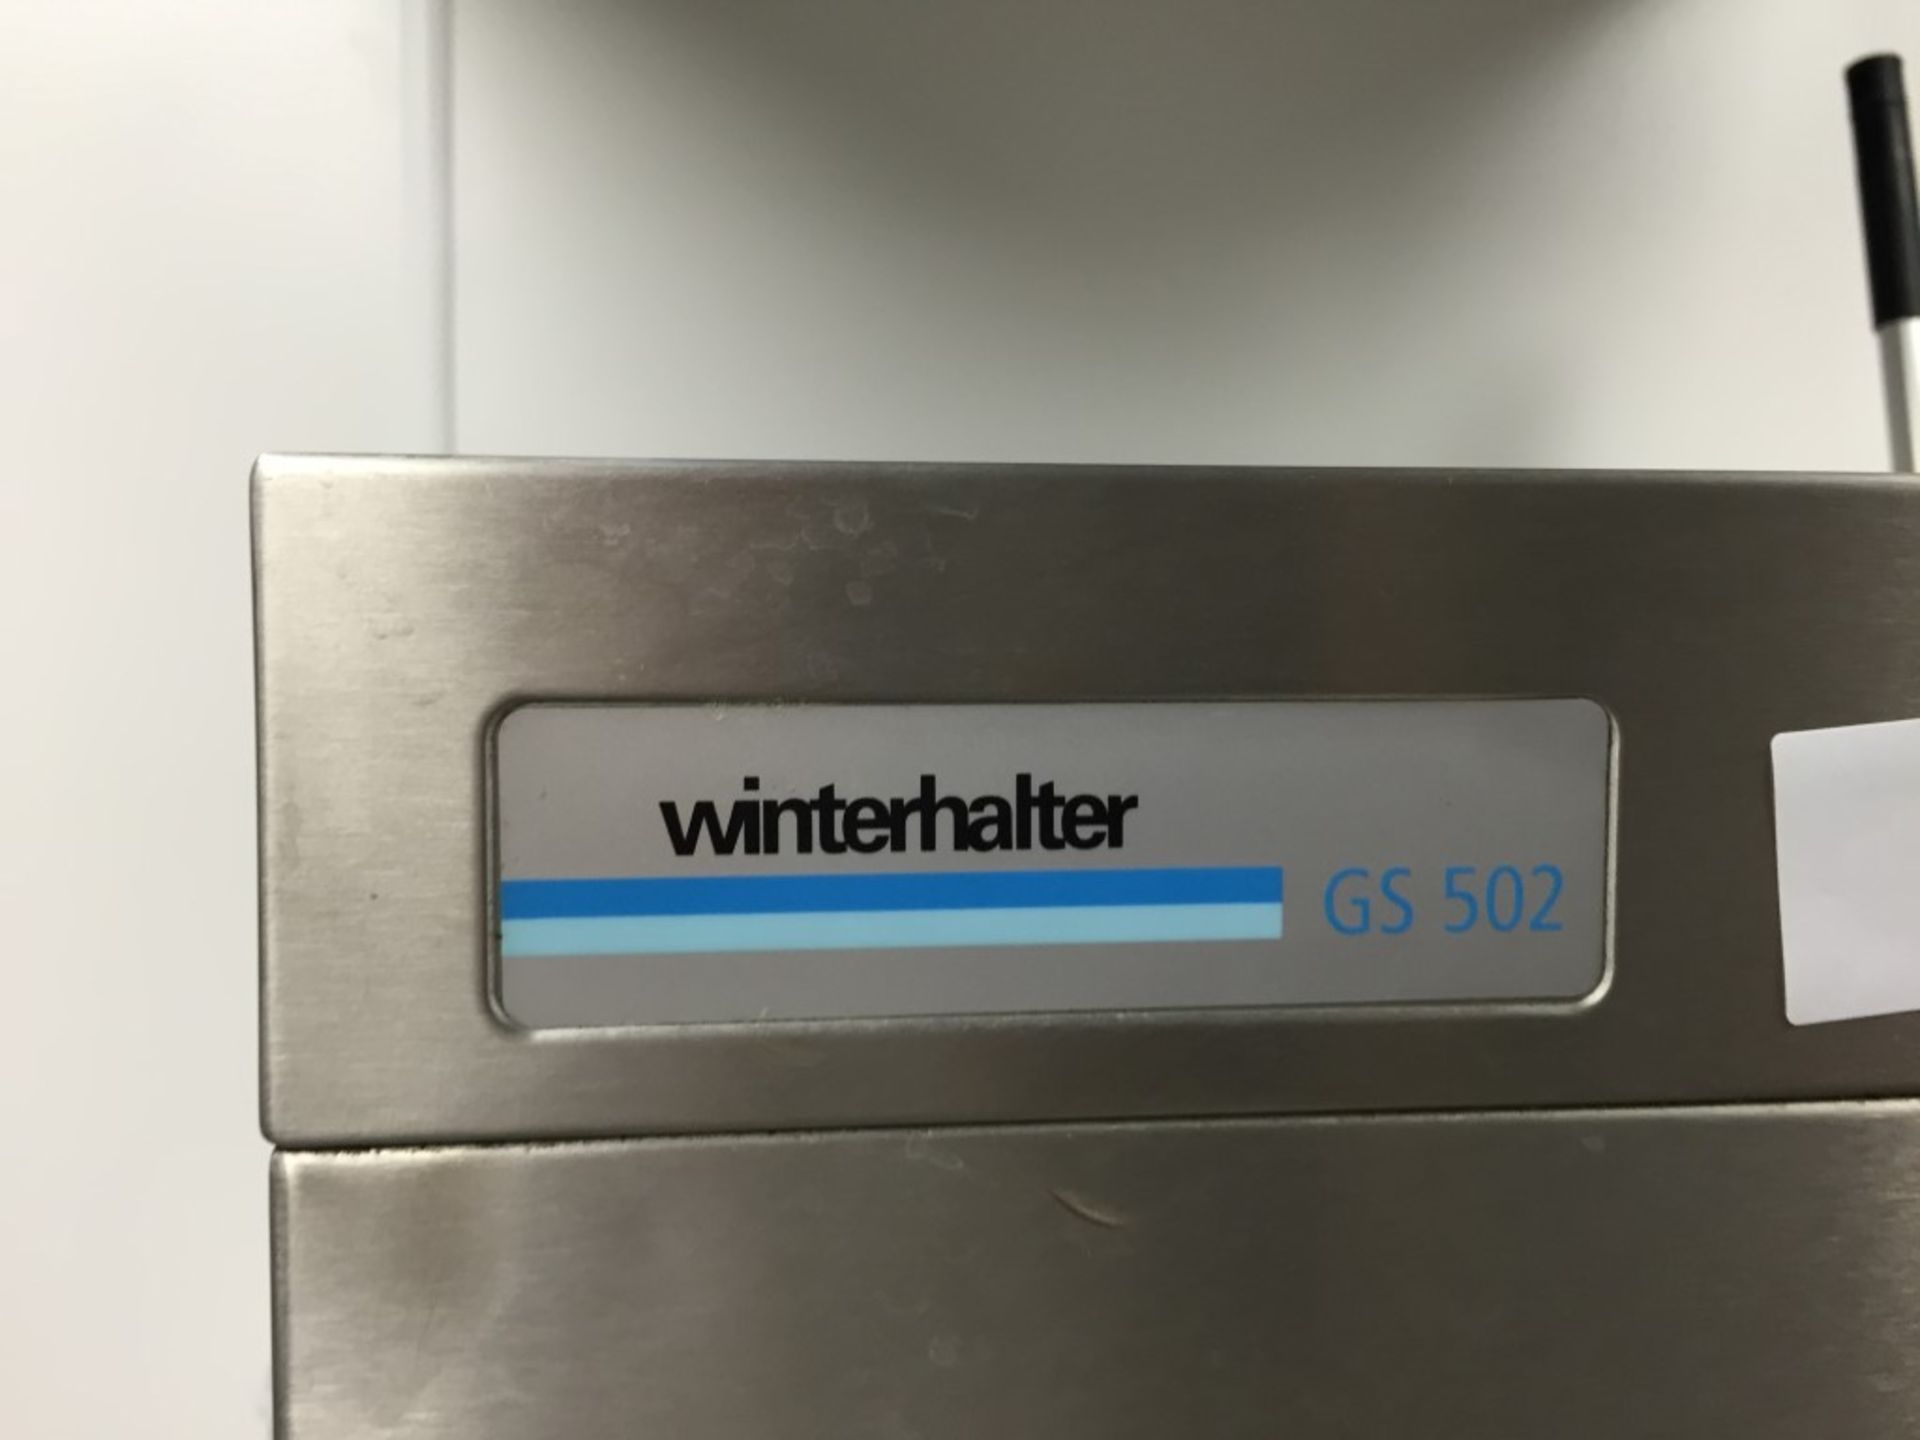 1 x Winterhalter GS502 Commercial Pass Through Dishwasher Station - Includes Stainless Steel Sink - Image 2 of 10